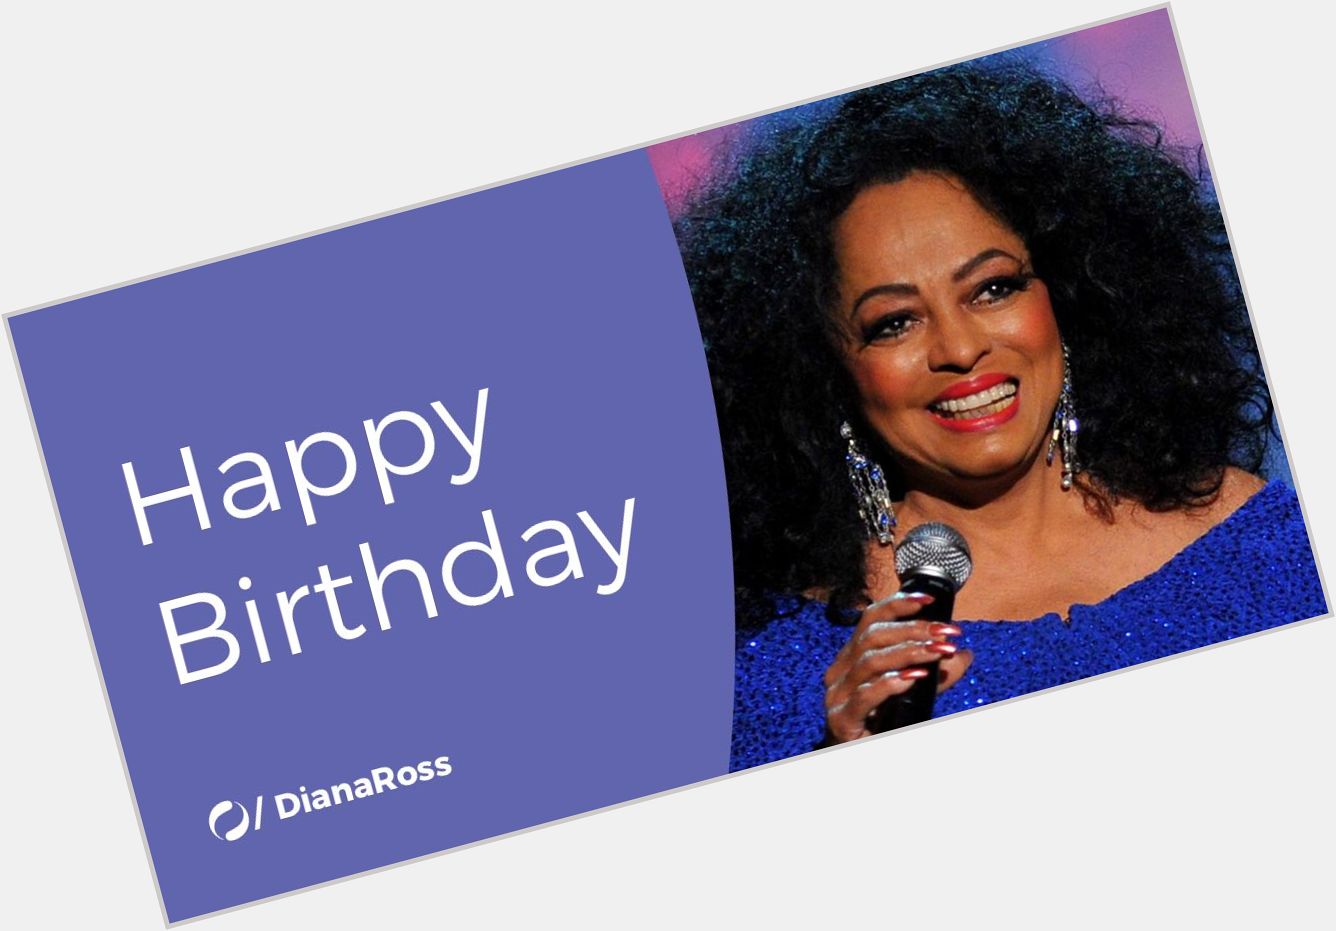 Today is Diana Ross\ birthday! Join us in wishing her a very Happy Birthday!  